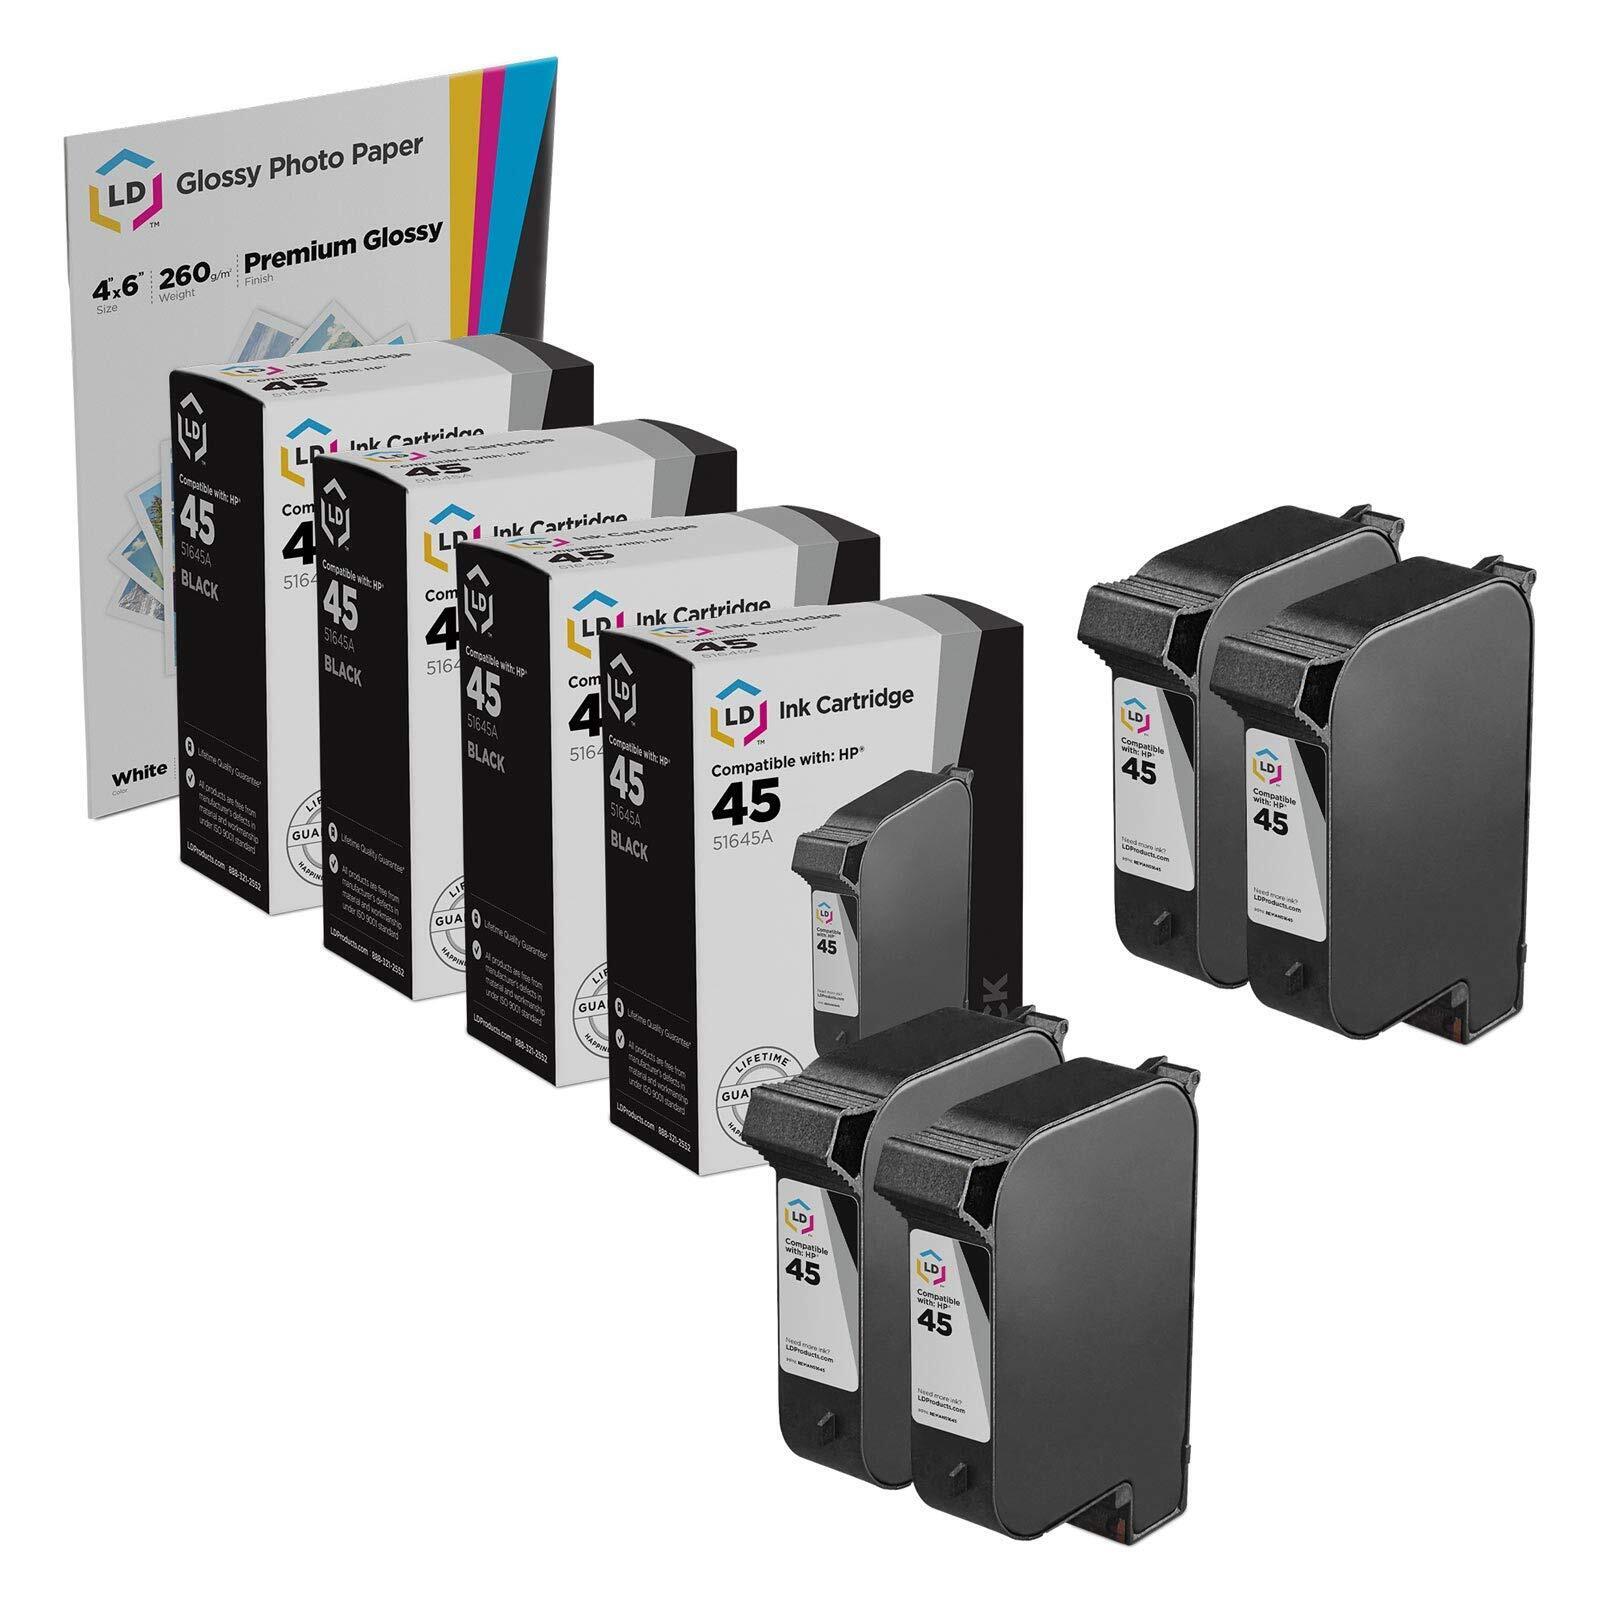 LD Products Replacement for HP 45 / 51645A Black Ink Cartridges 4-Pack